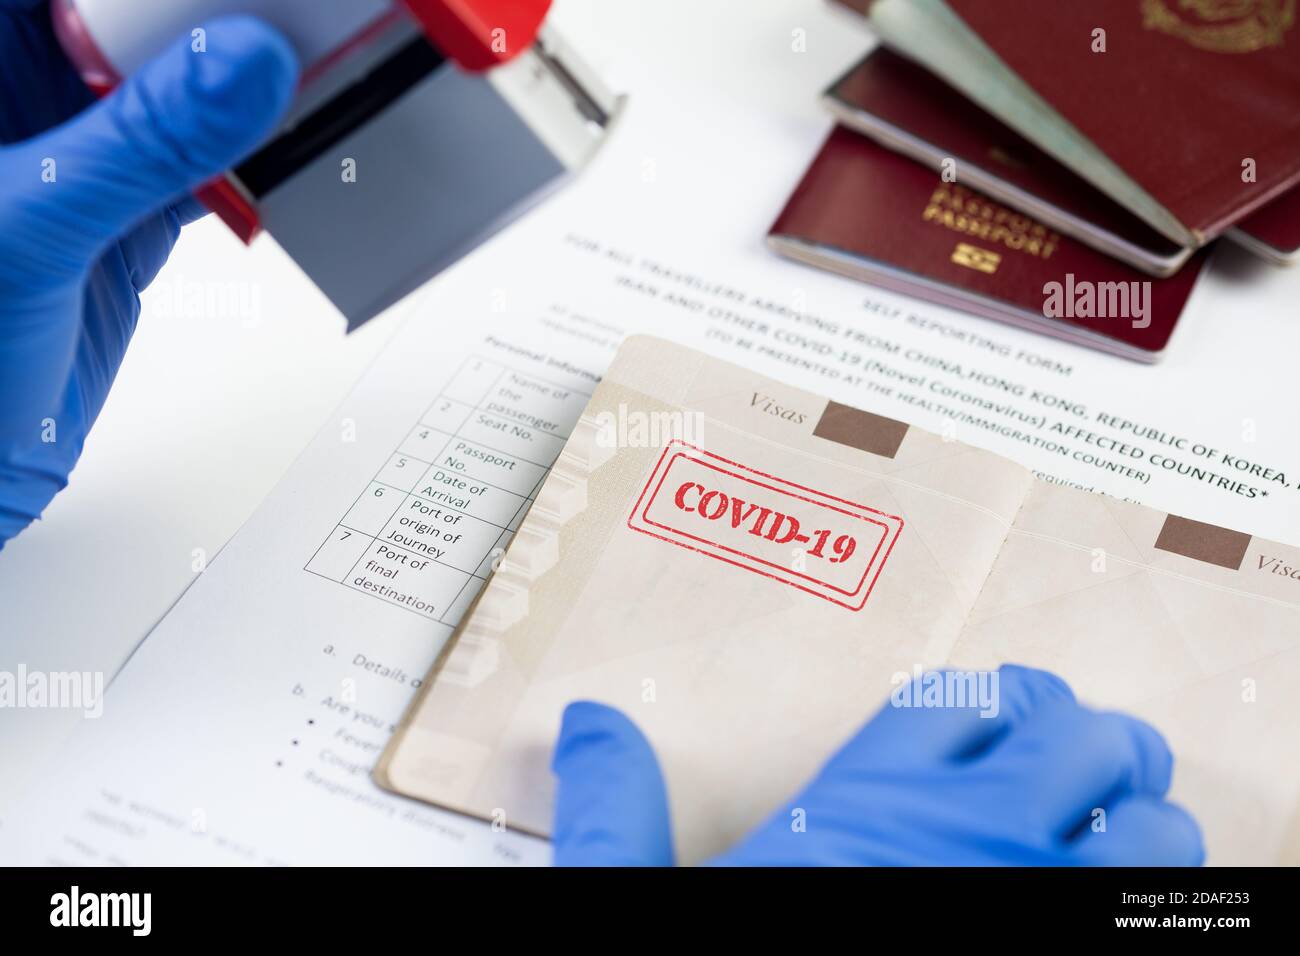 COVID-19 stamped in passport,airport border customs health and safety security check,restrictive no entry measures due to COVID-19 corona virus diseas Stock Photo